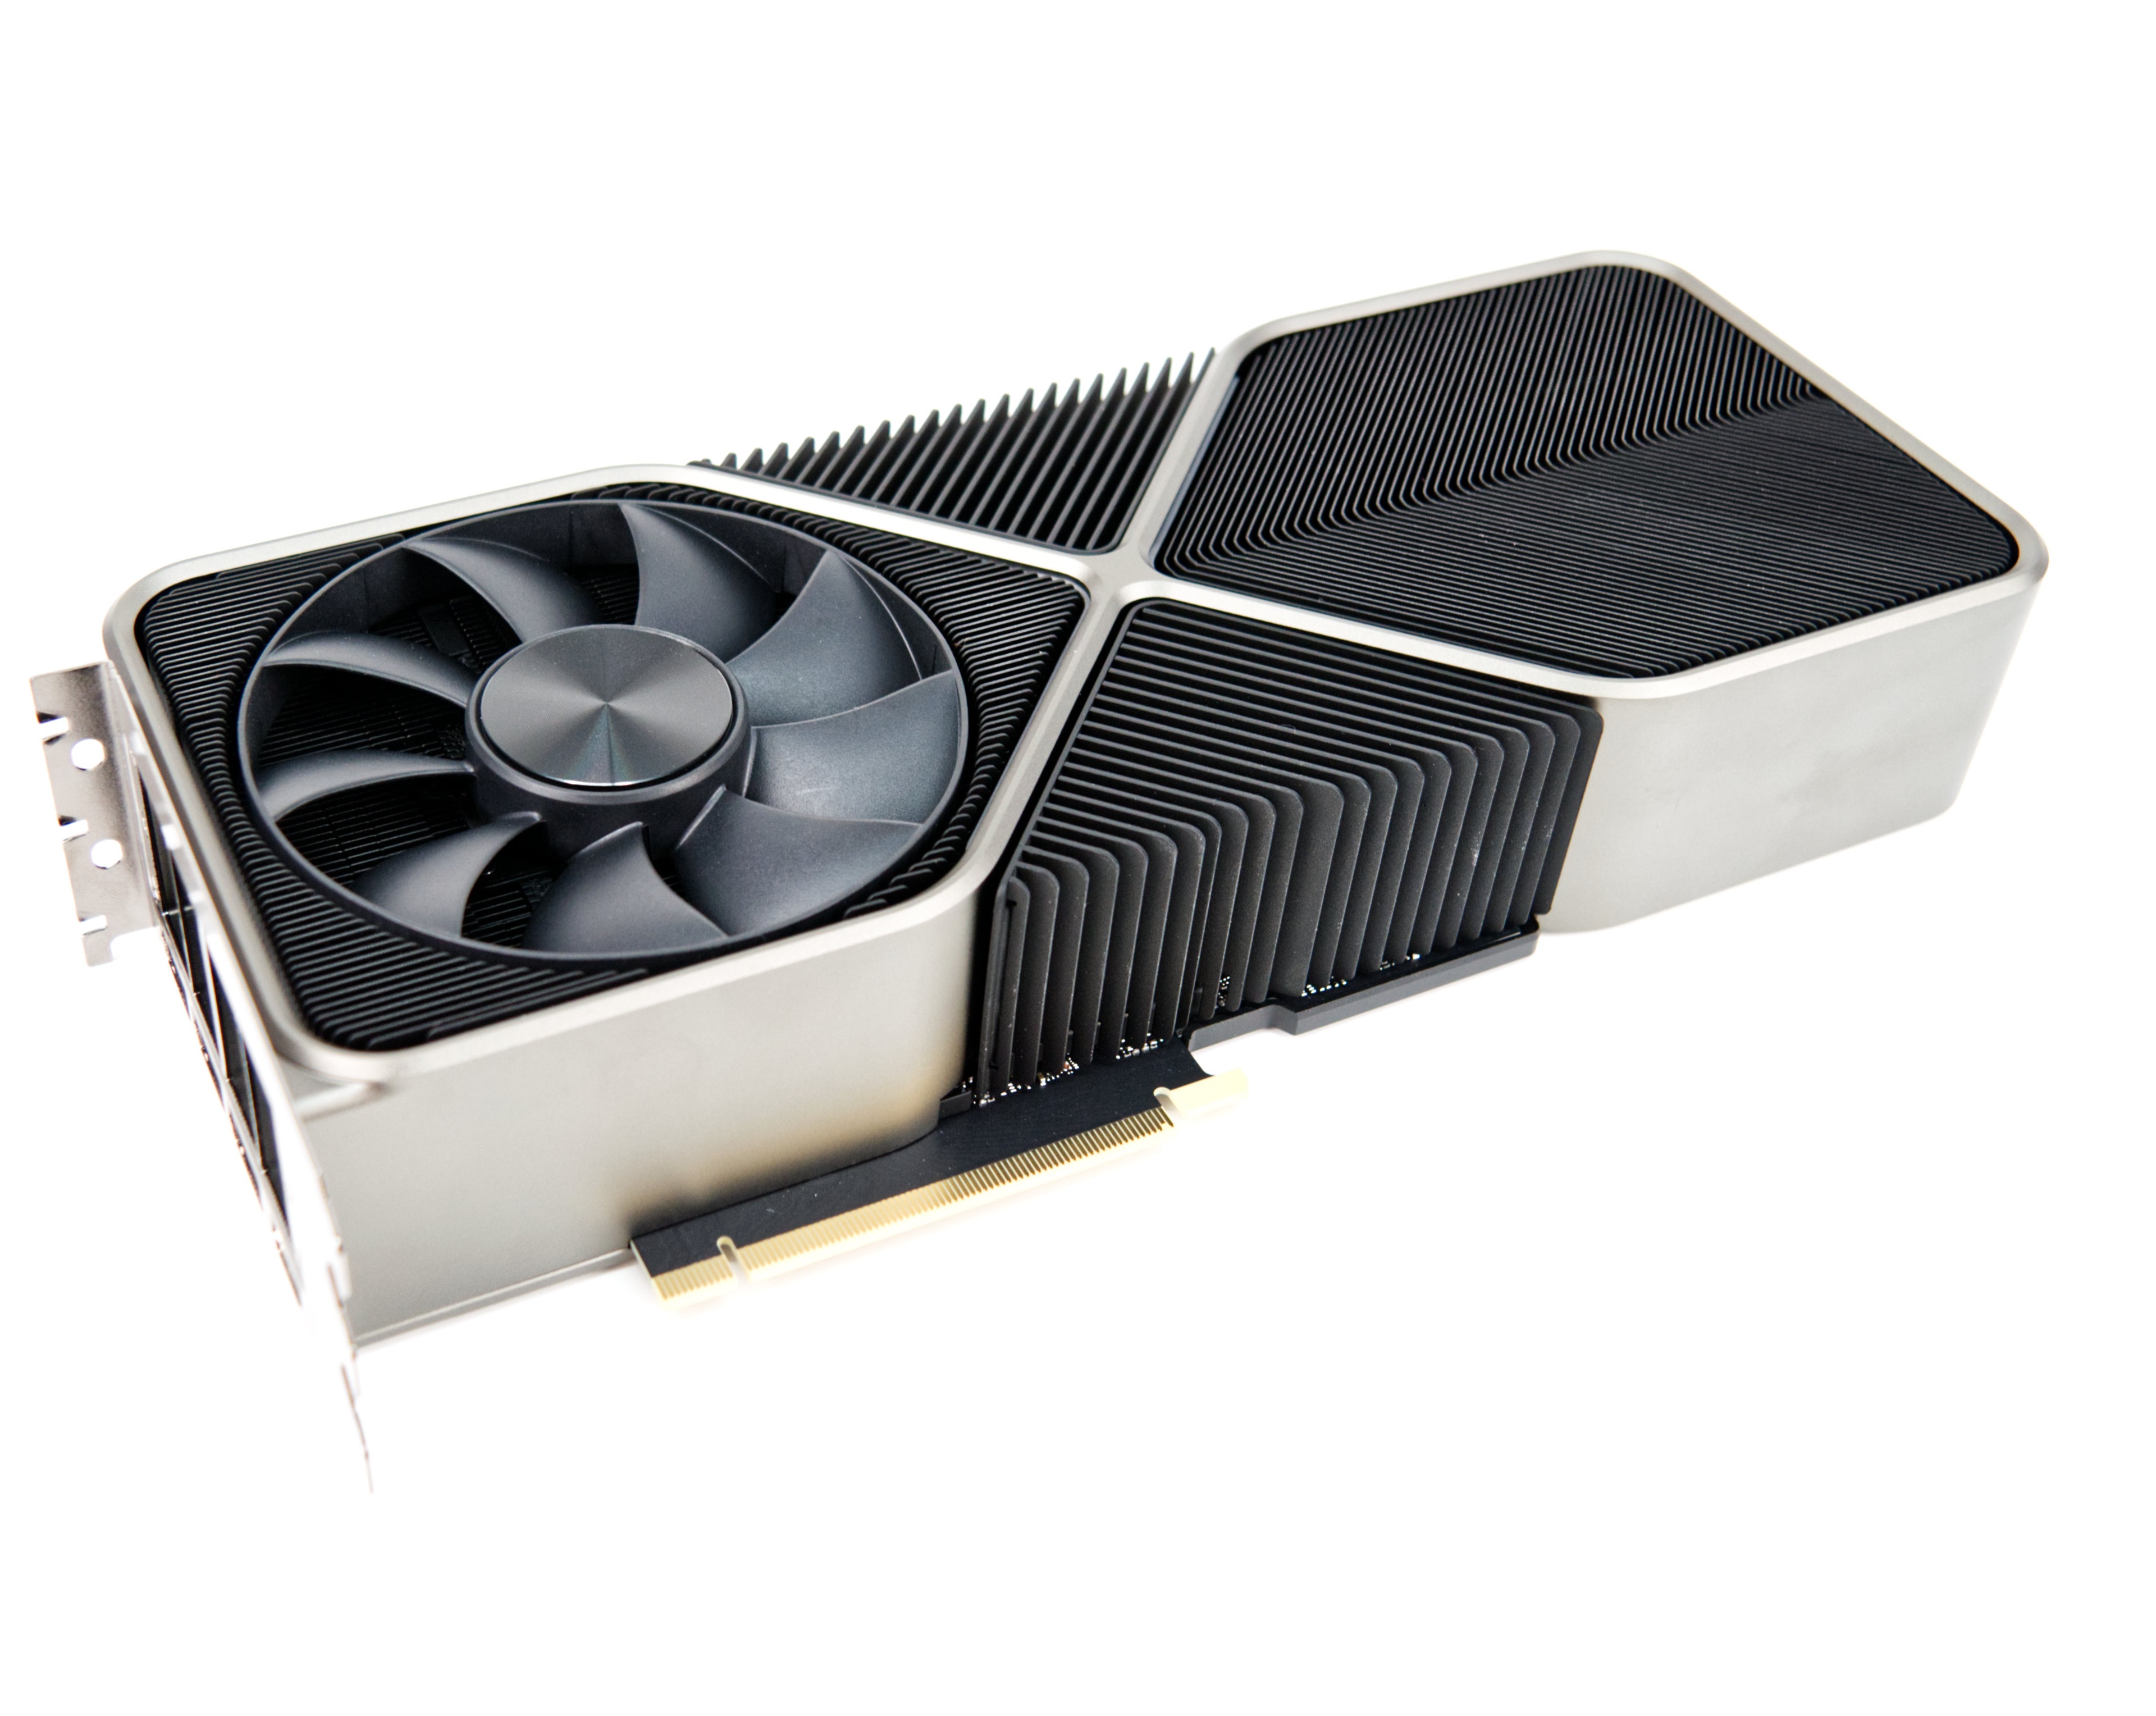 Nvidia RTX 3090 FE - High-end graphics power at a premium price! - Reviews